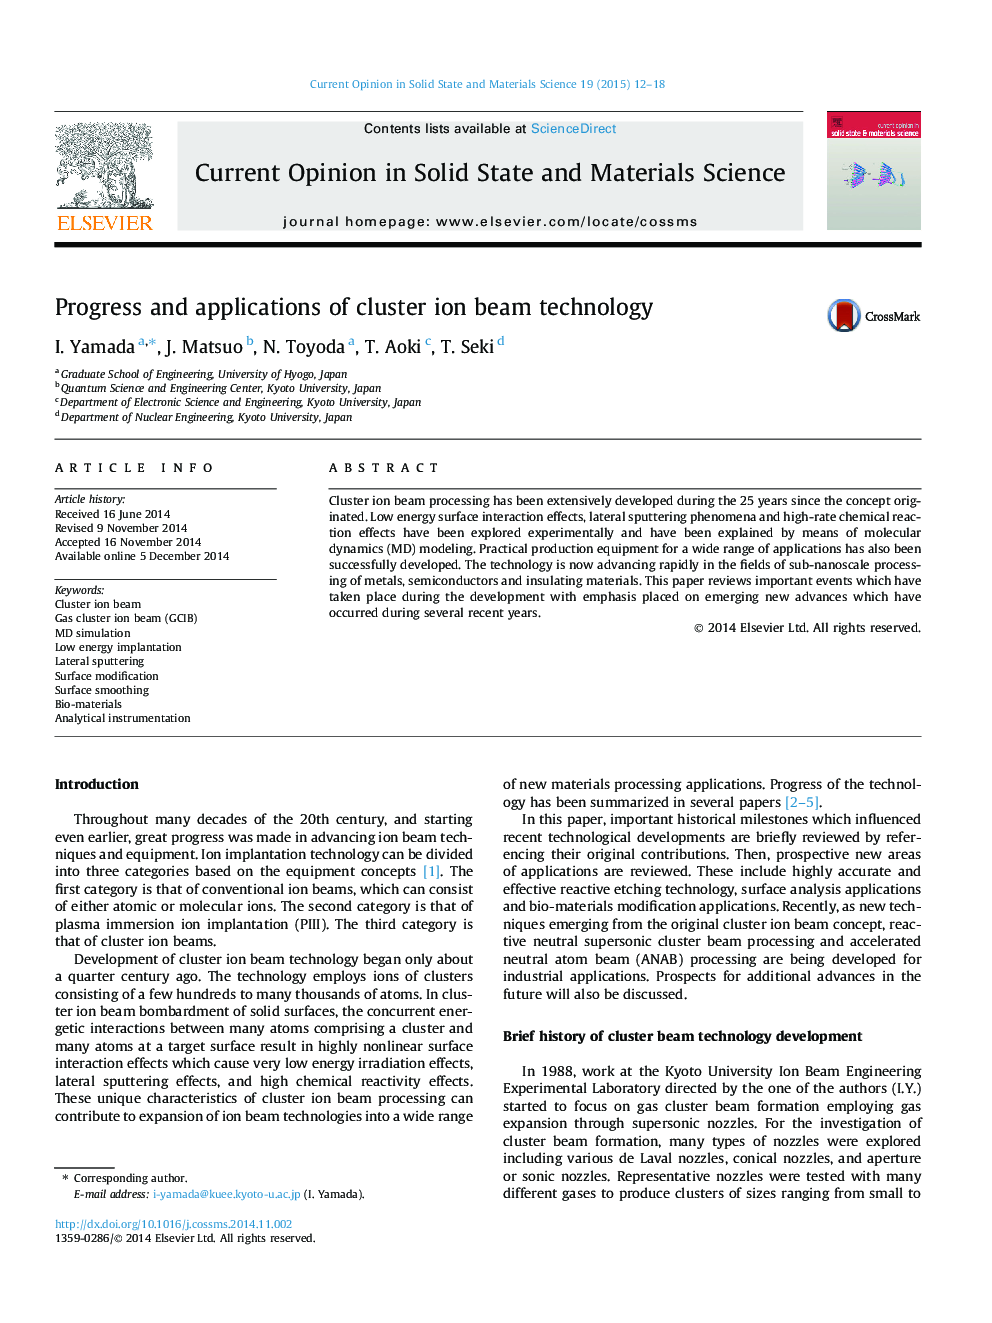 Progress and applications of cluster ion beam technology